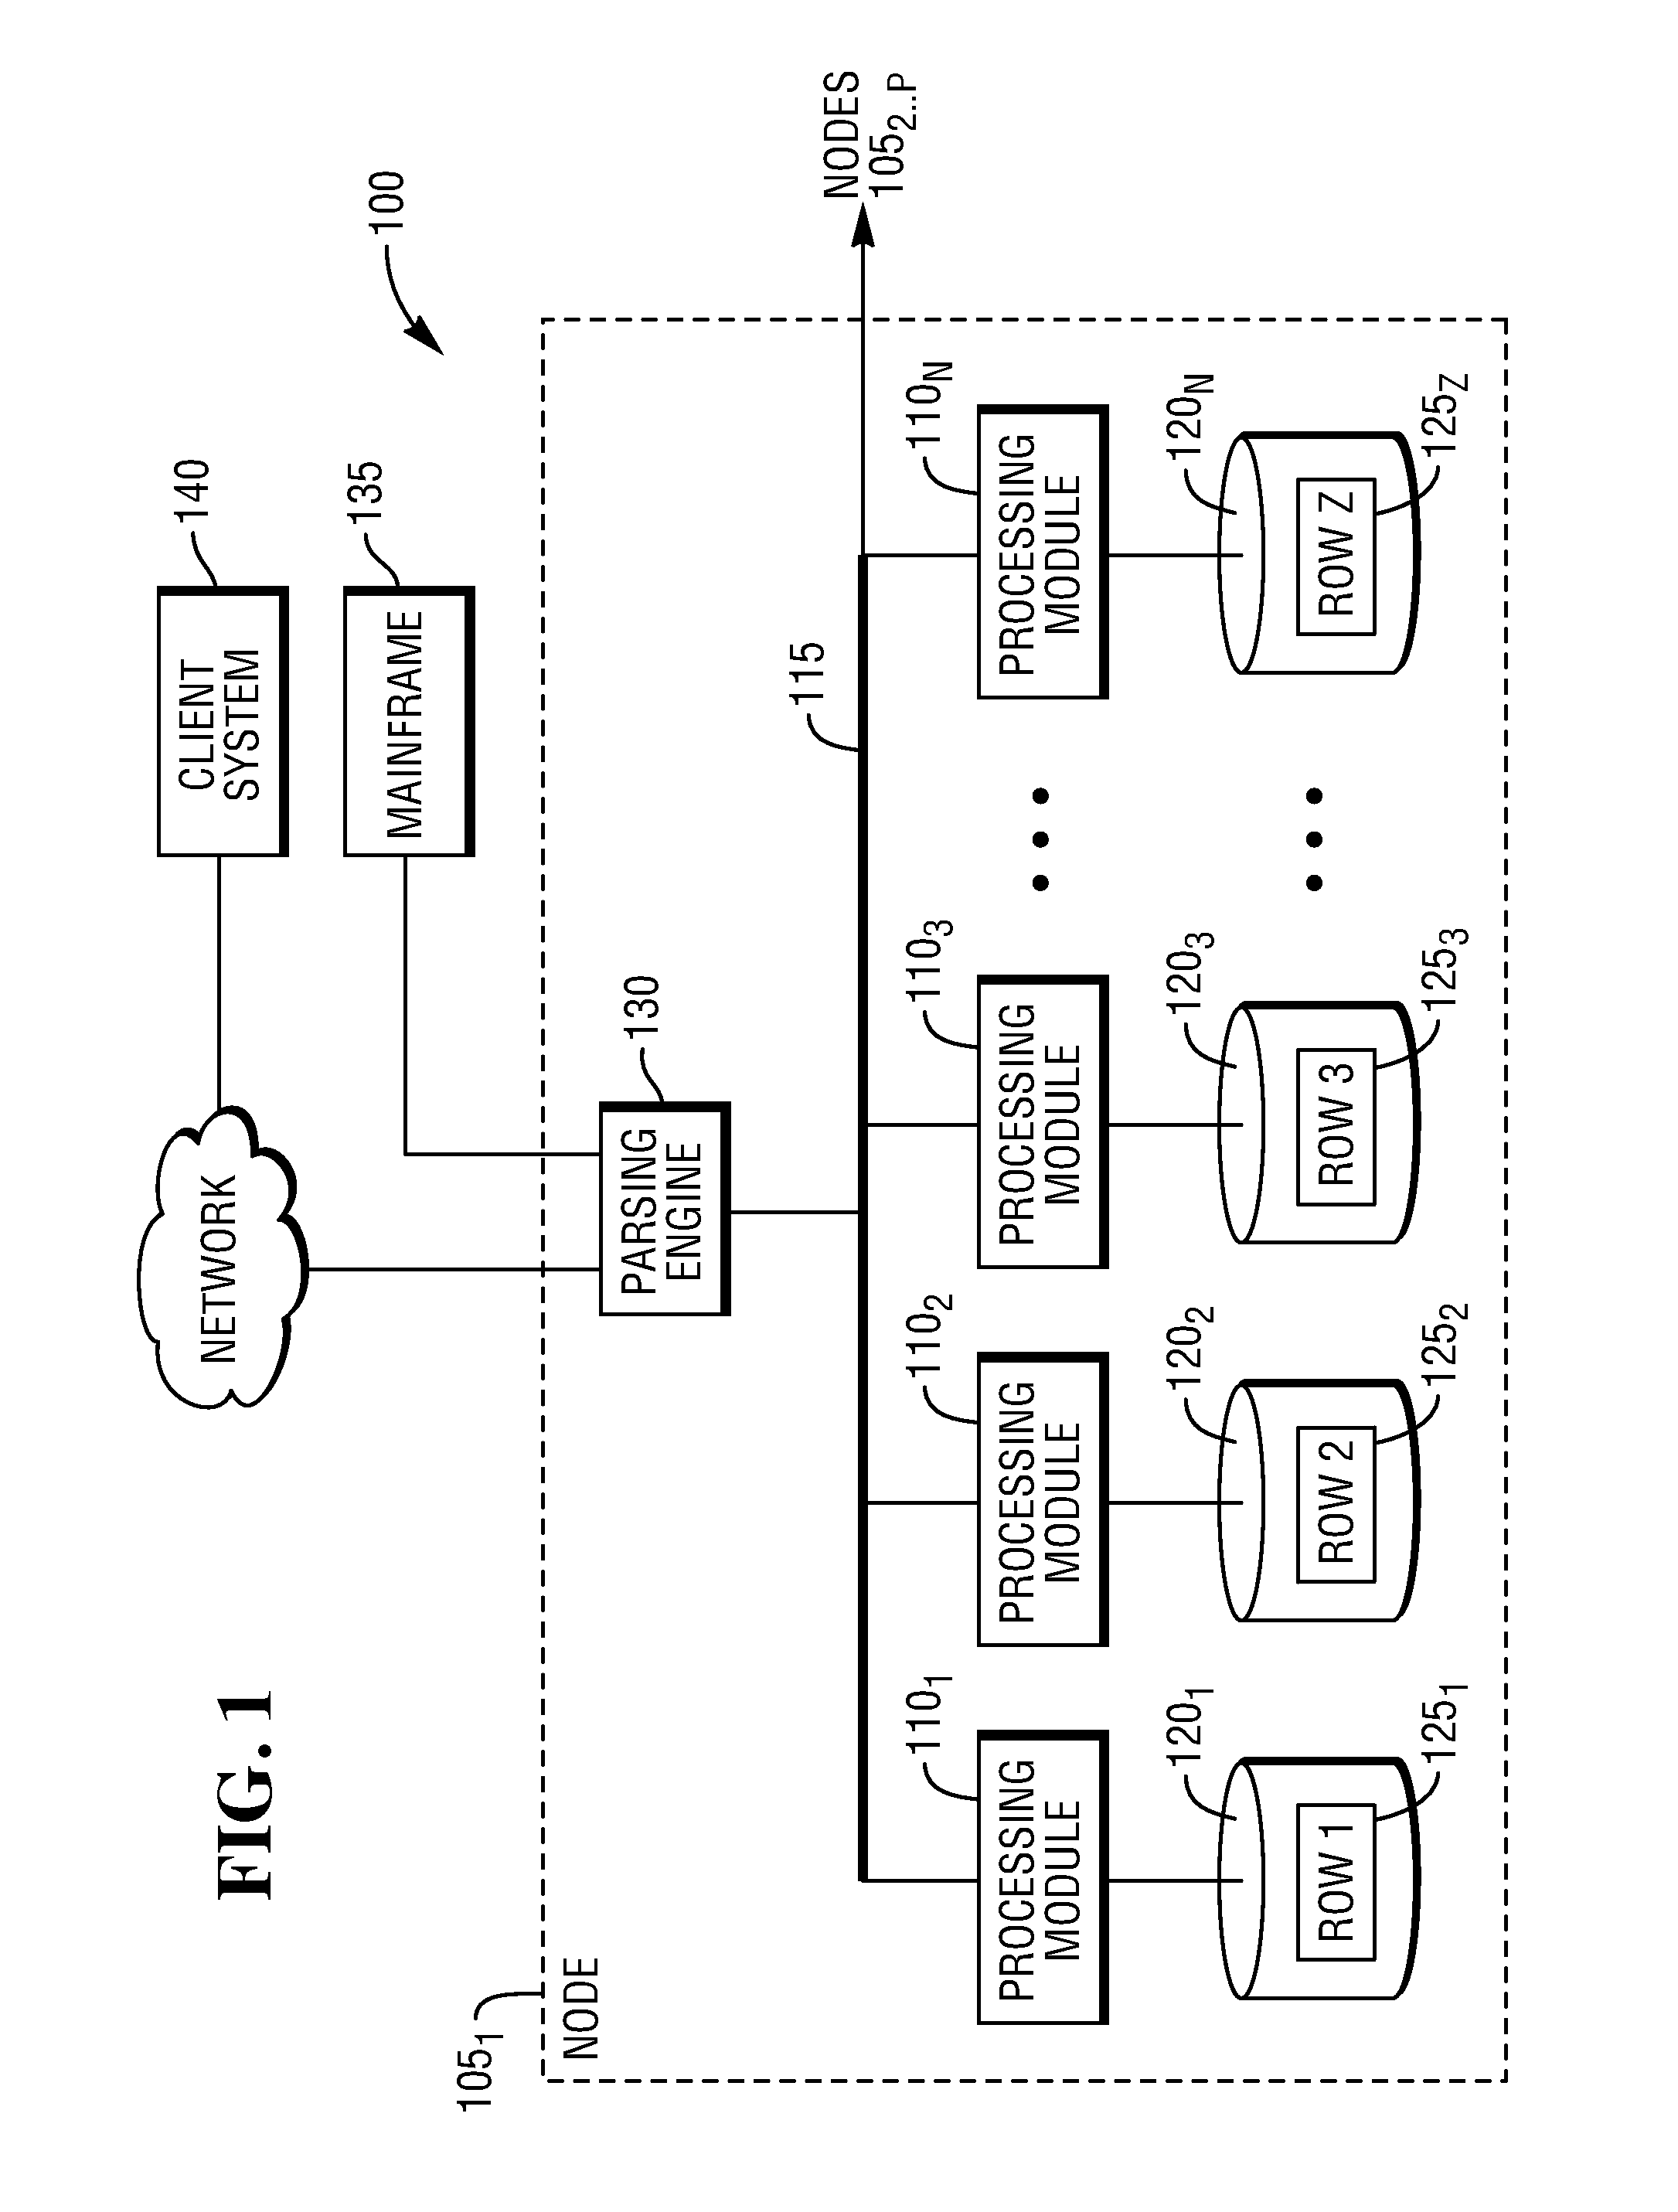 System and method for data compression using a dynamic compression dictionary